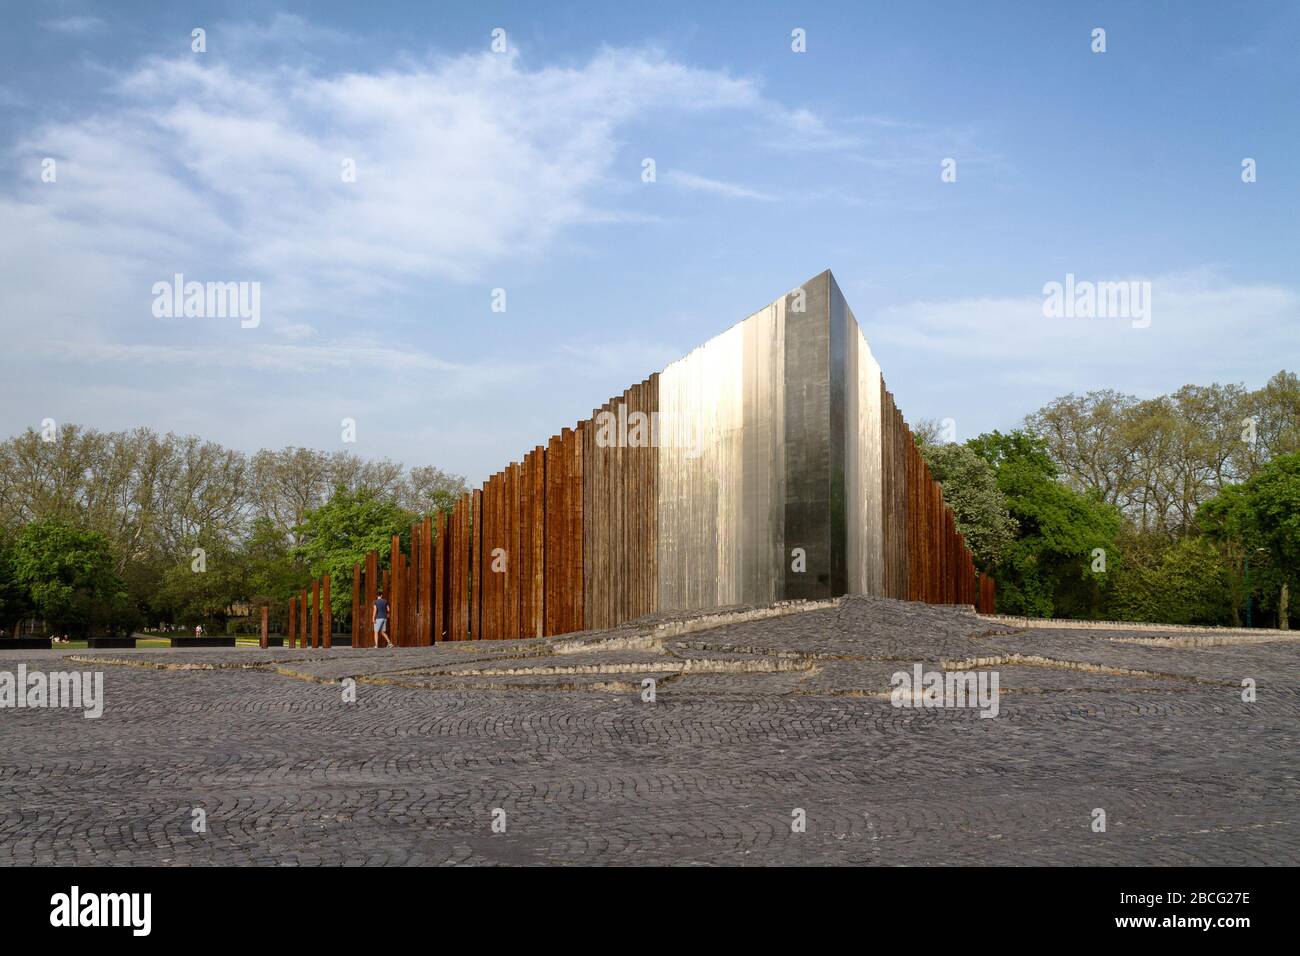 The memorial to the 1956 Revolution on Otvenhatosok tere in the City Park of Budapest Stock Photo